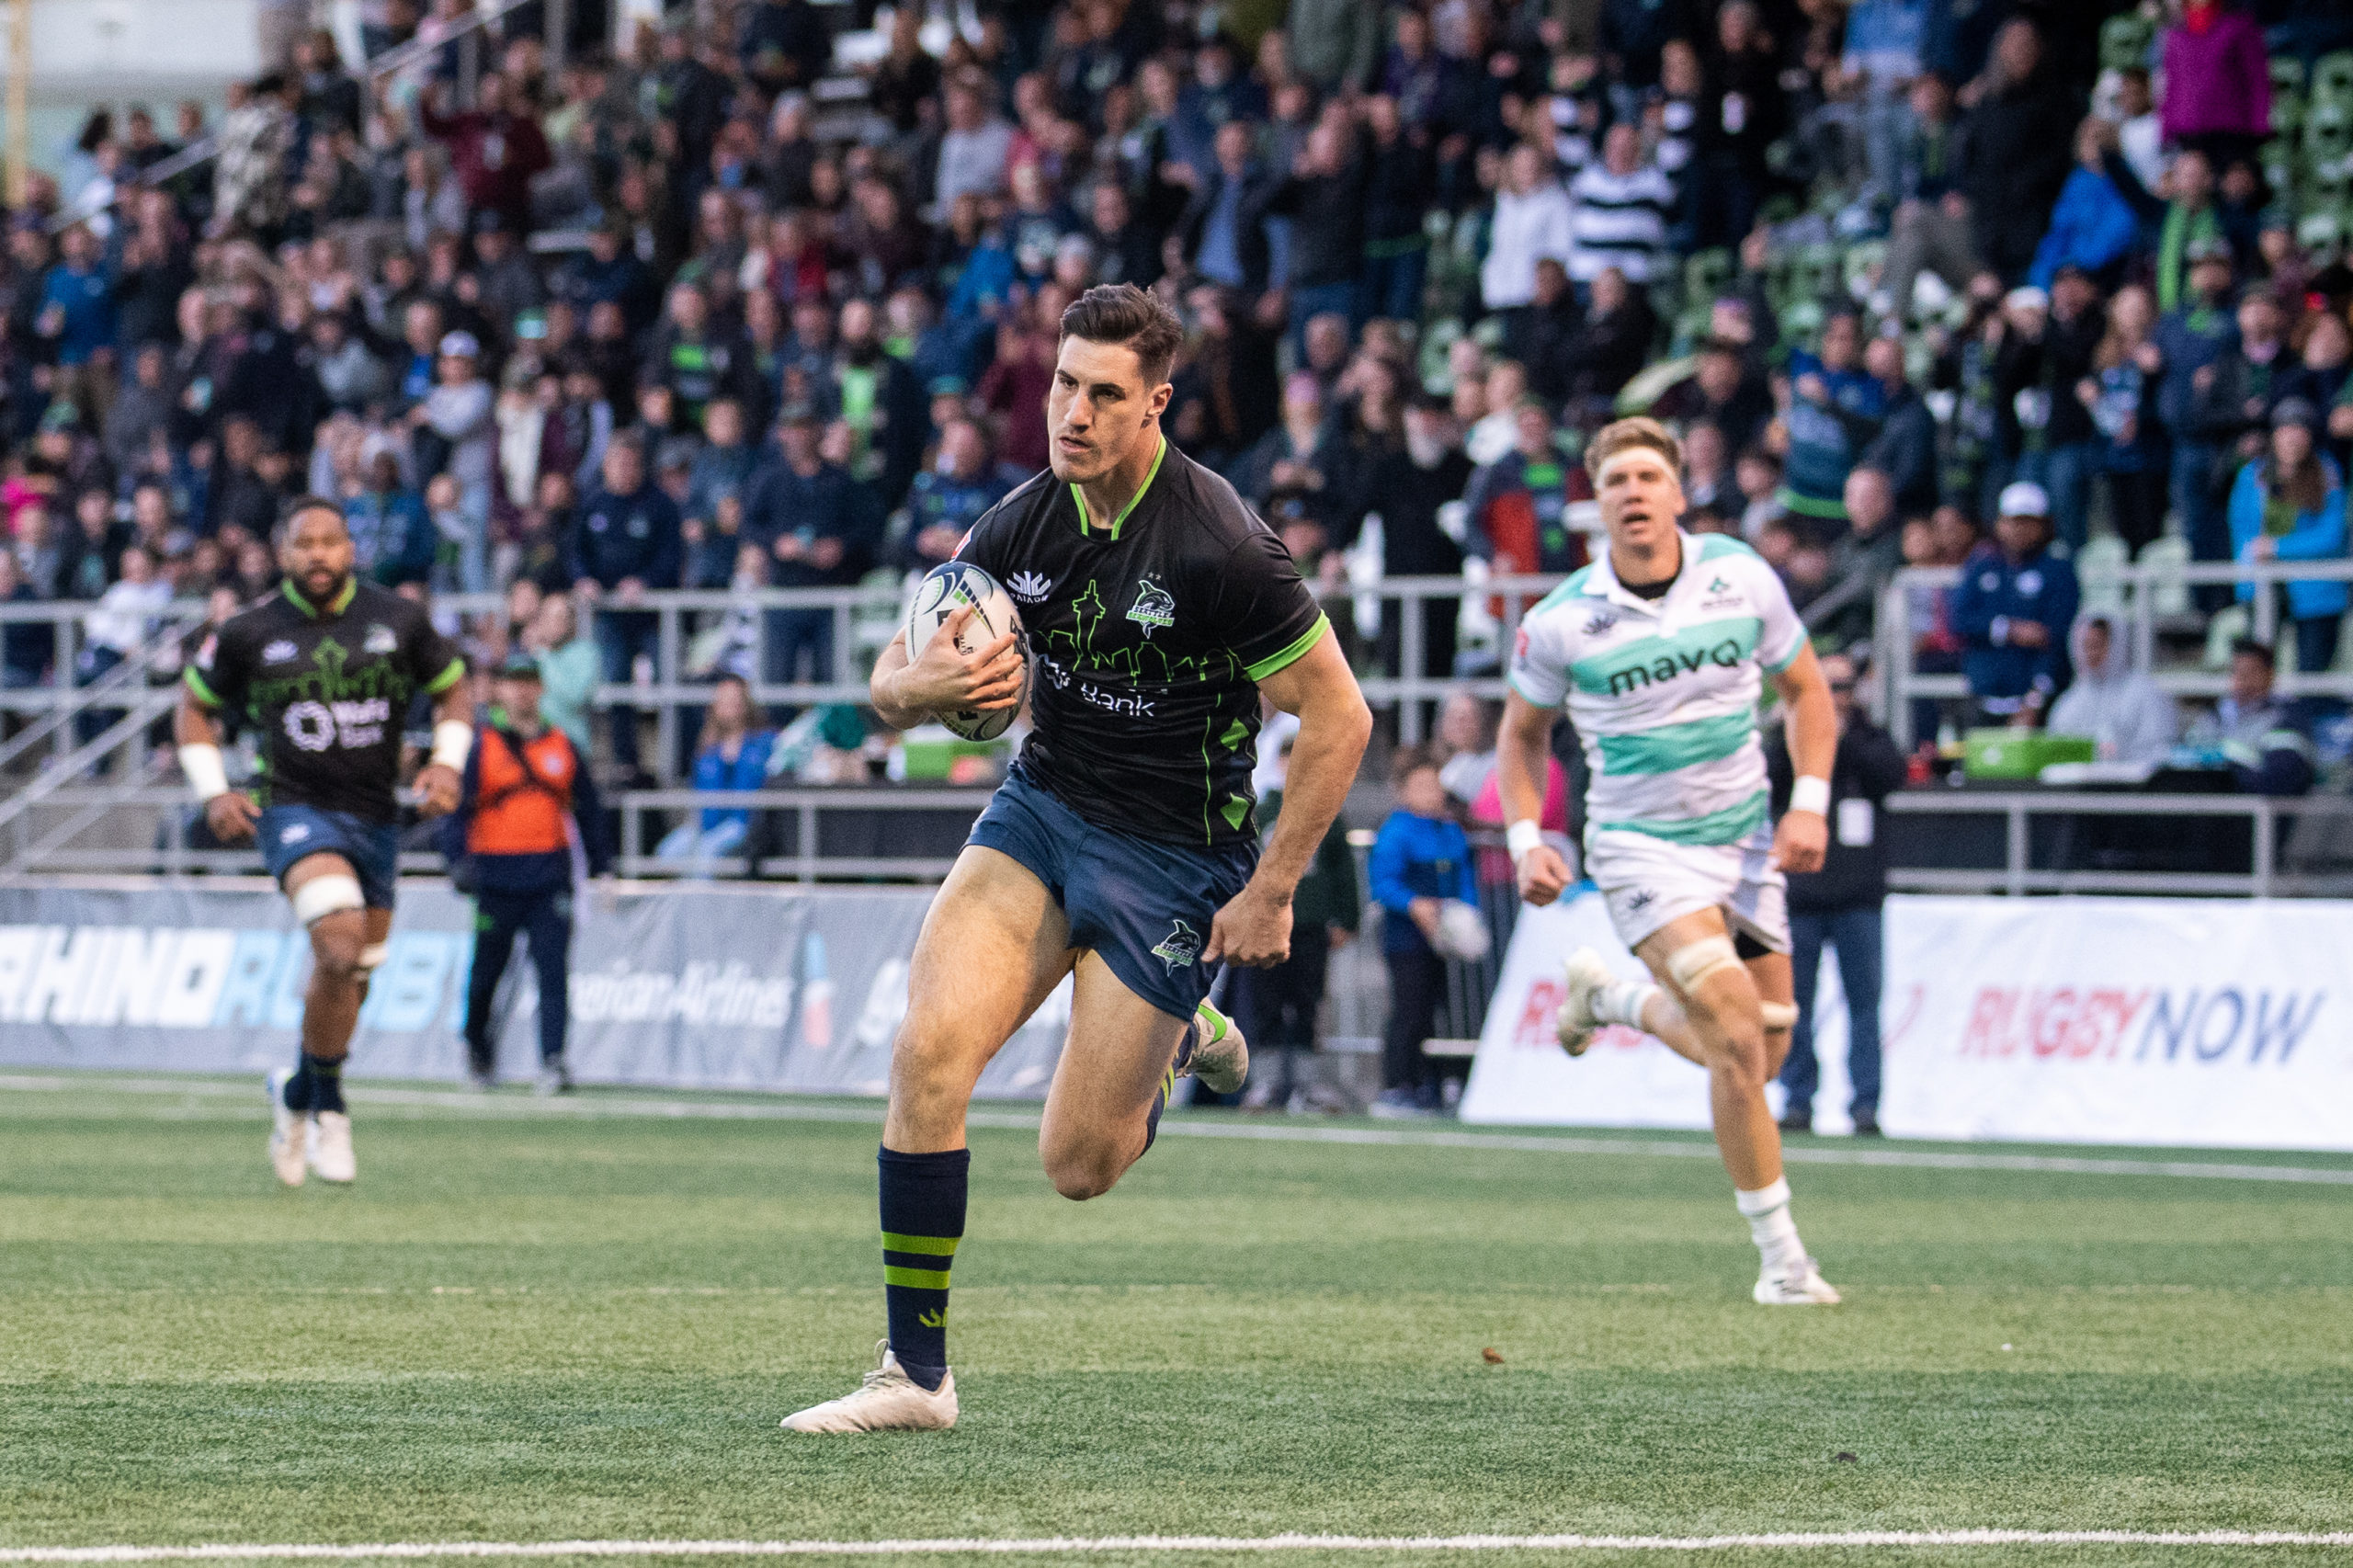 Seawolves Dazzle Mother’s Day Crowd with 11-Try Performance Over Jackals